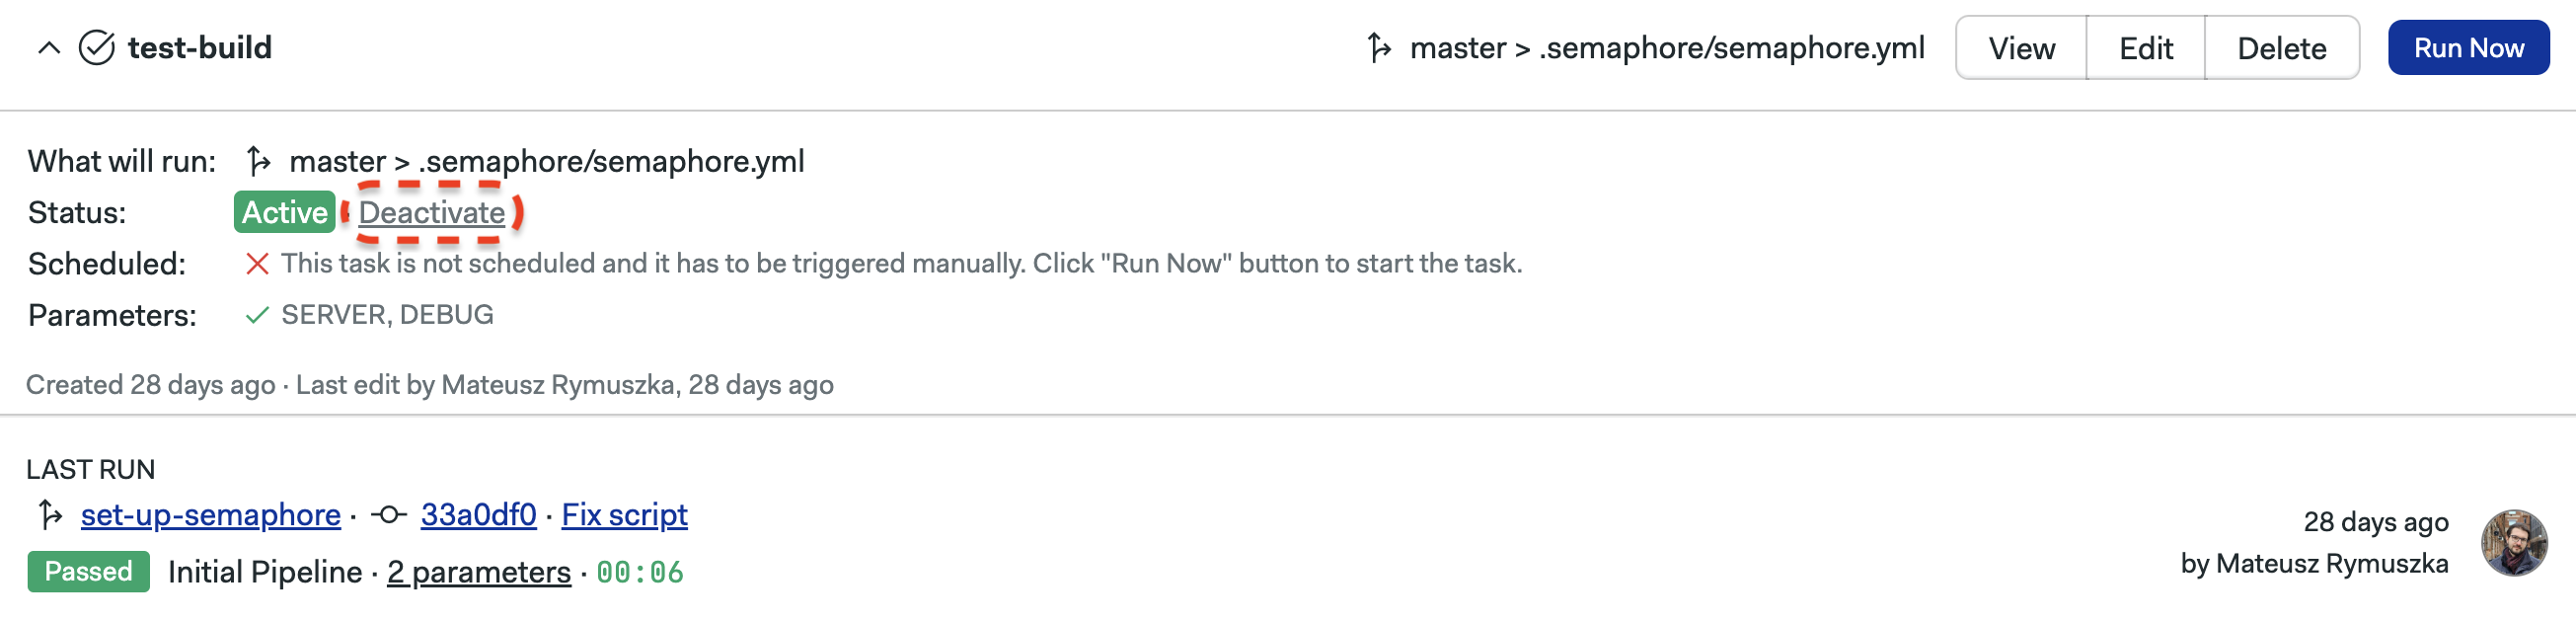 Deactivate button in the project tasks page